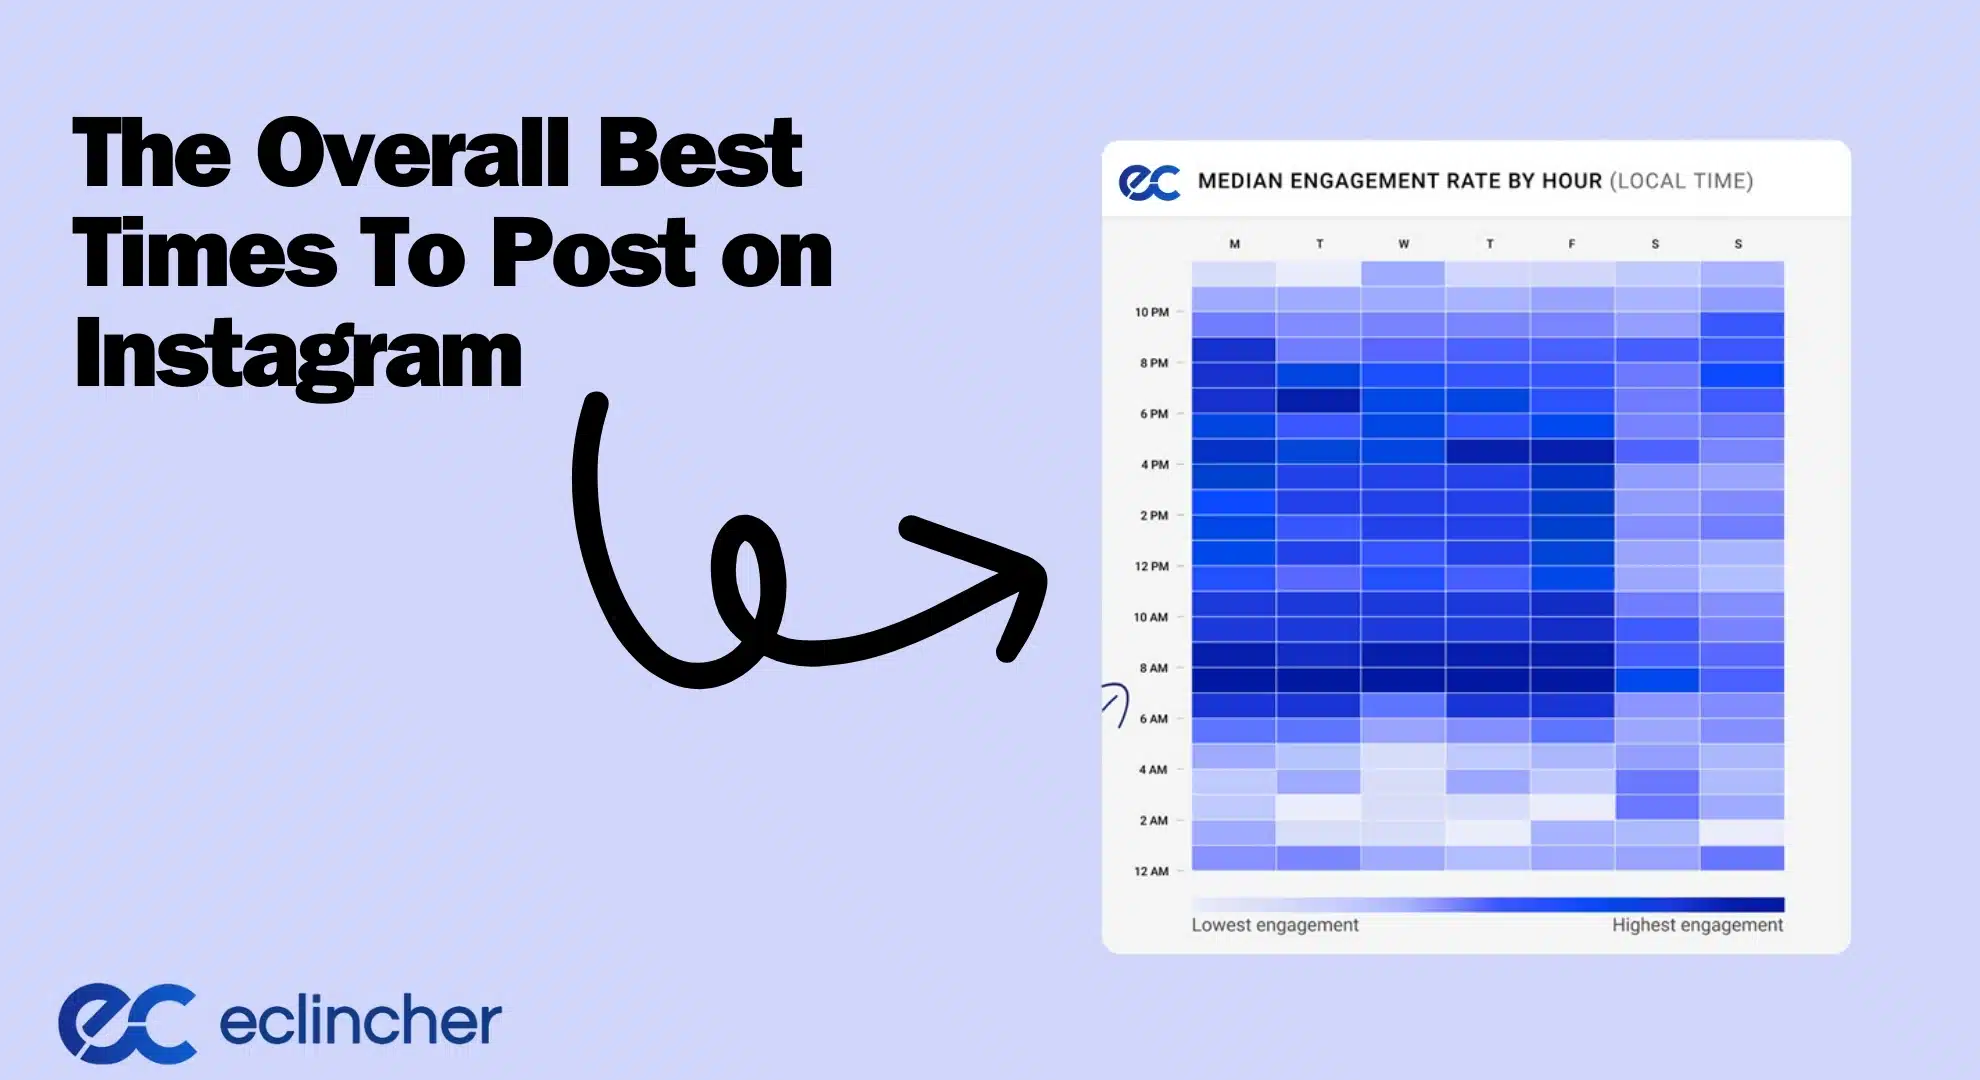 The Overall Best Times To Post on Instagram